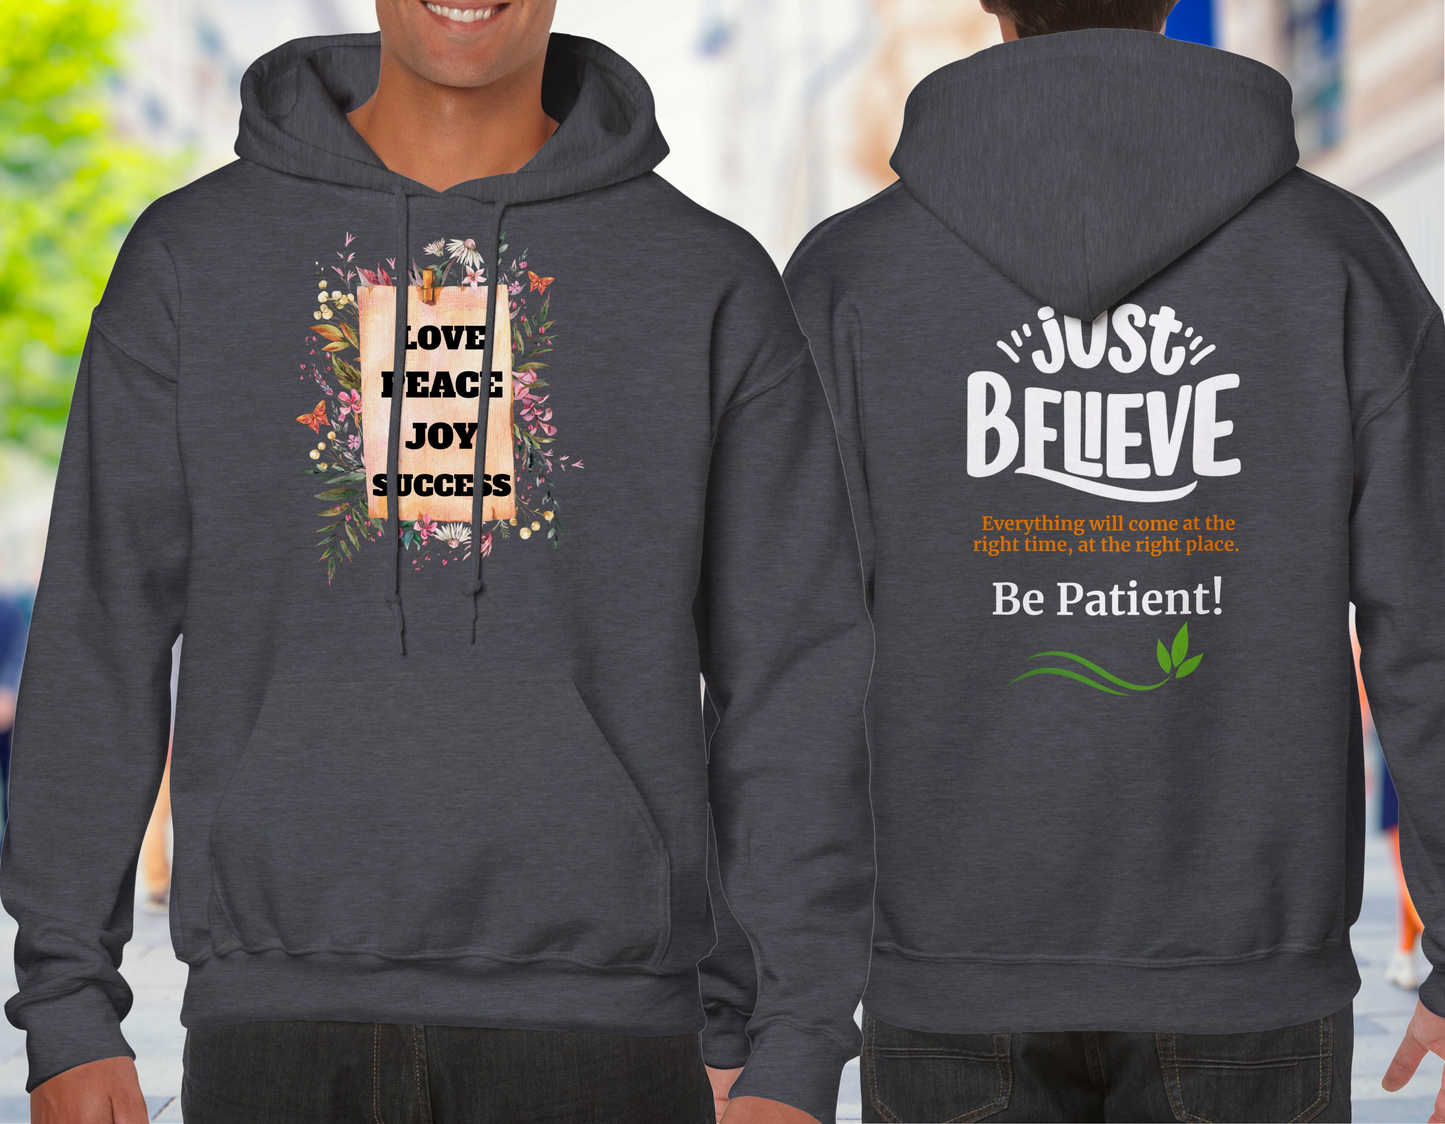 Cottagecore Unisex Hoddie, with positive Words: Love, Peace, Joy and Success. In the back: Just Believe everything will come at the right time and the right place. Be patient!Positive Quote Top, Vintage Jumper Gift Idea - dark grey hoodie